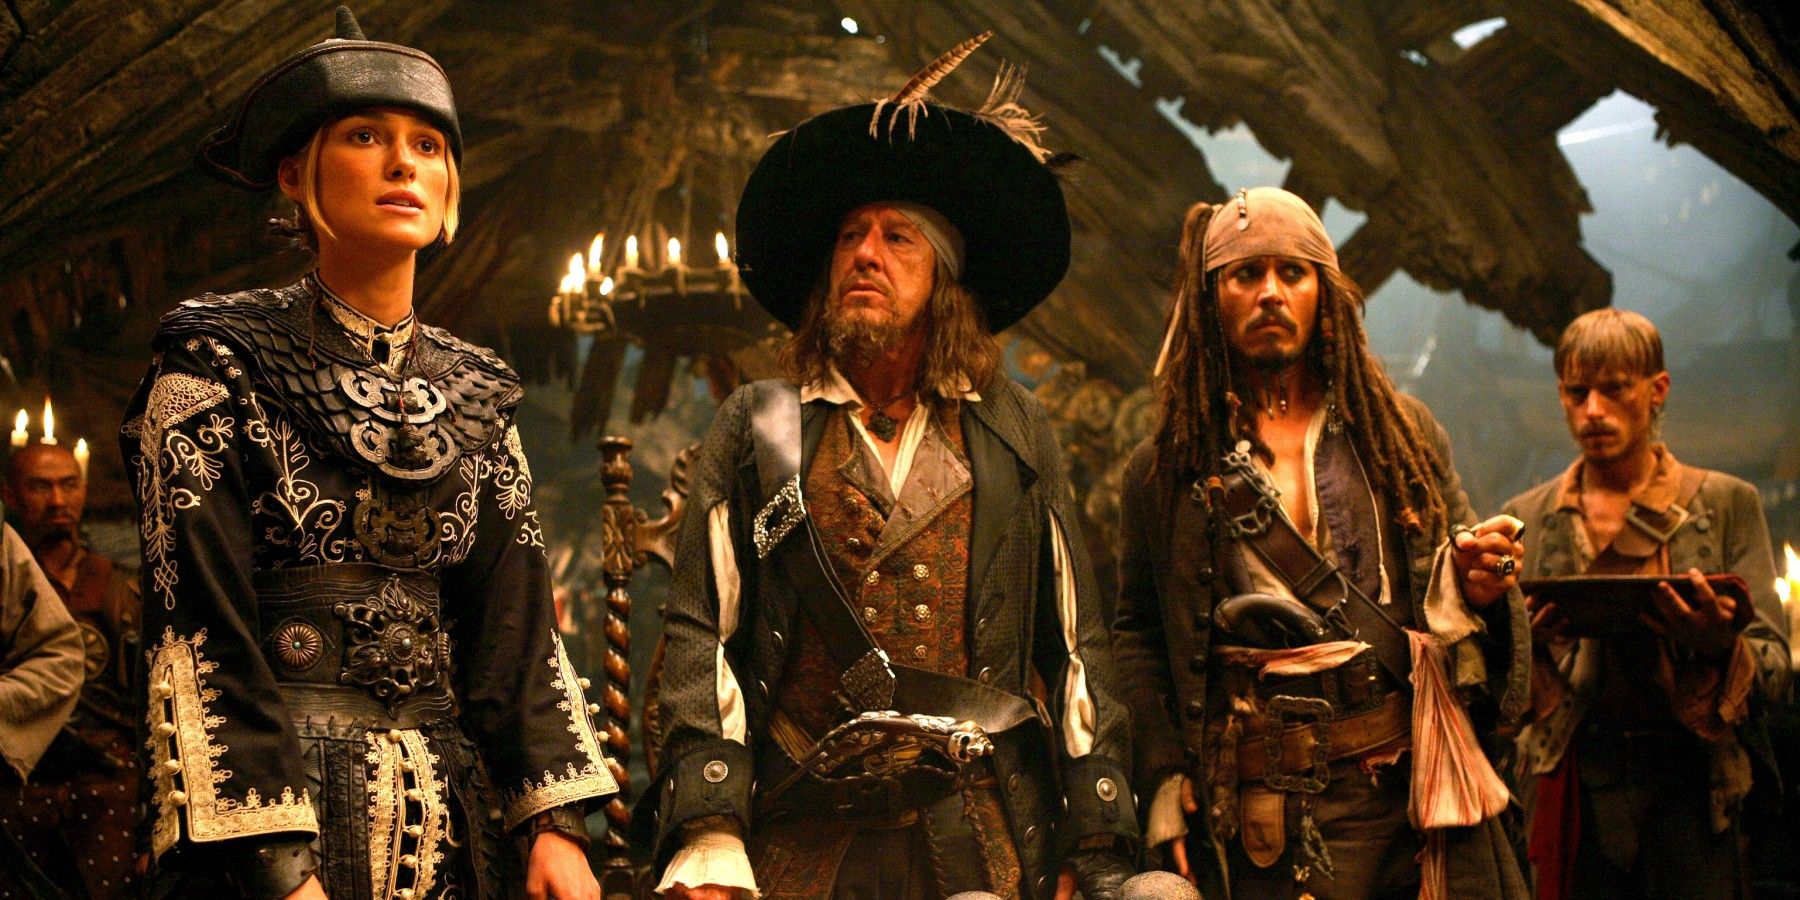 Pirates of the Carribean At Worlds End Elizabeth Swan Jack Sparrow Barbossa Brethren Court Pieces of Eight